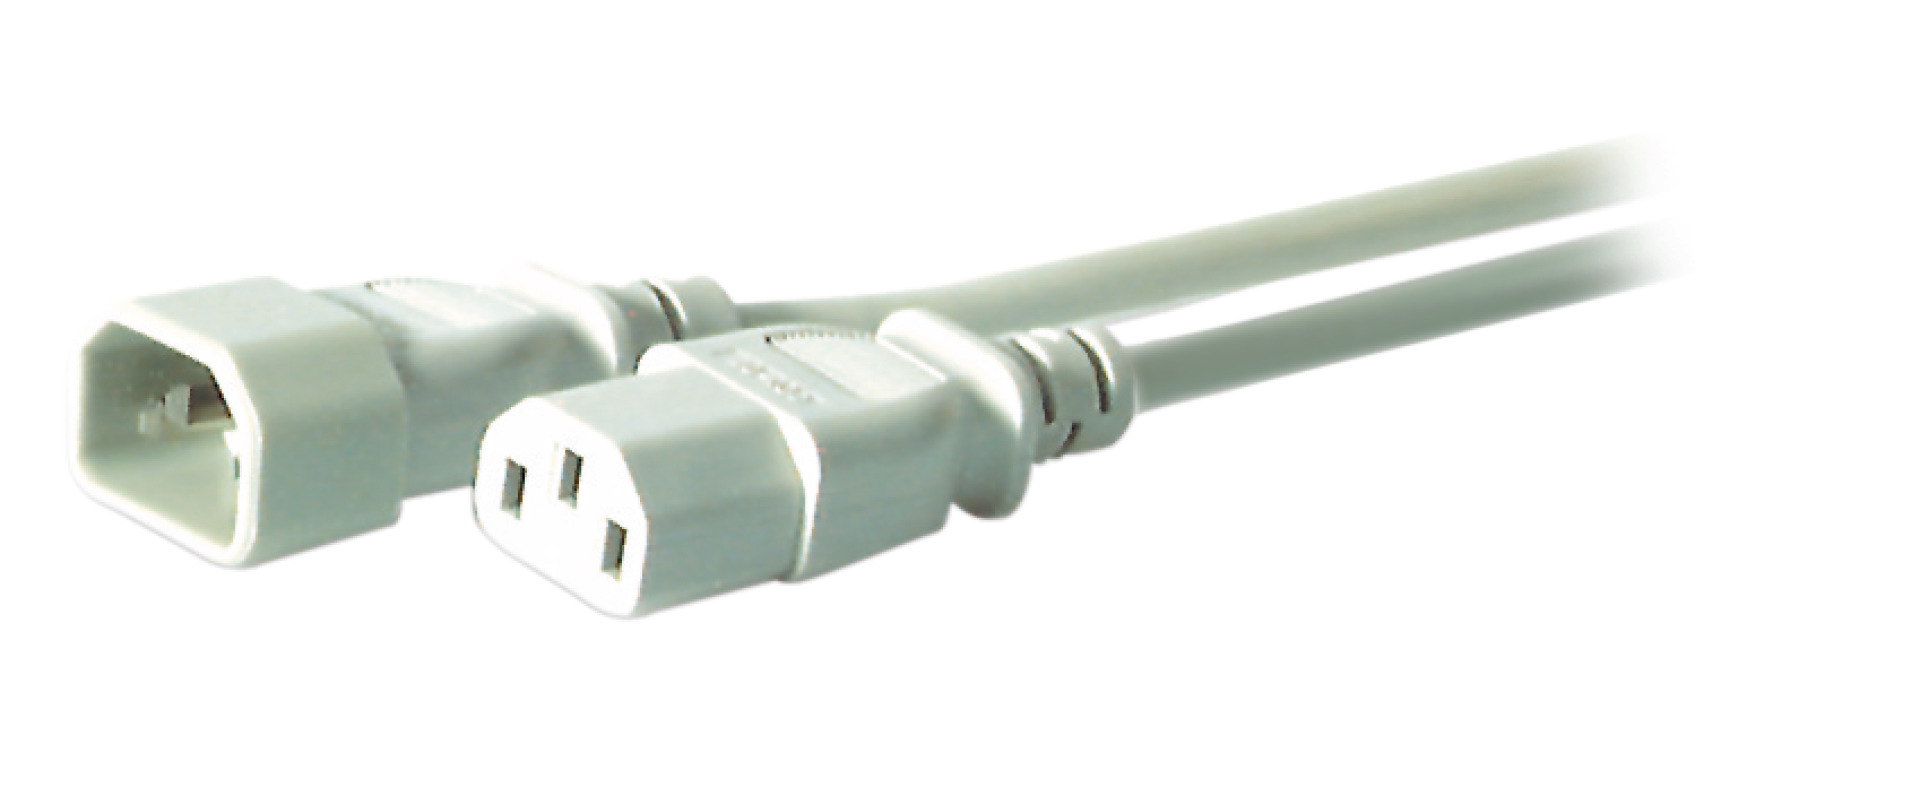 Extension Cable C14 180° - C13 180°, Grey, 3.0 m, 3 x 1.00 mm²